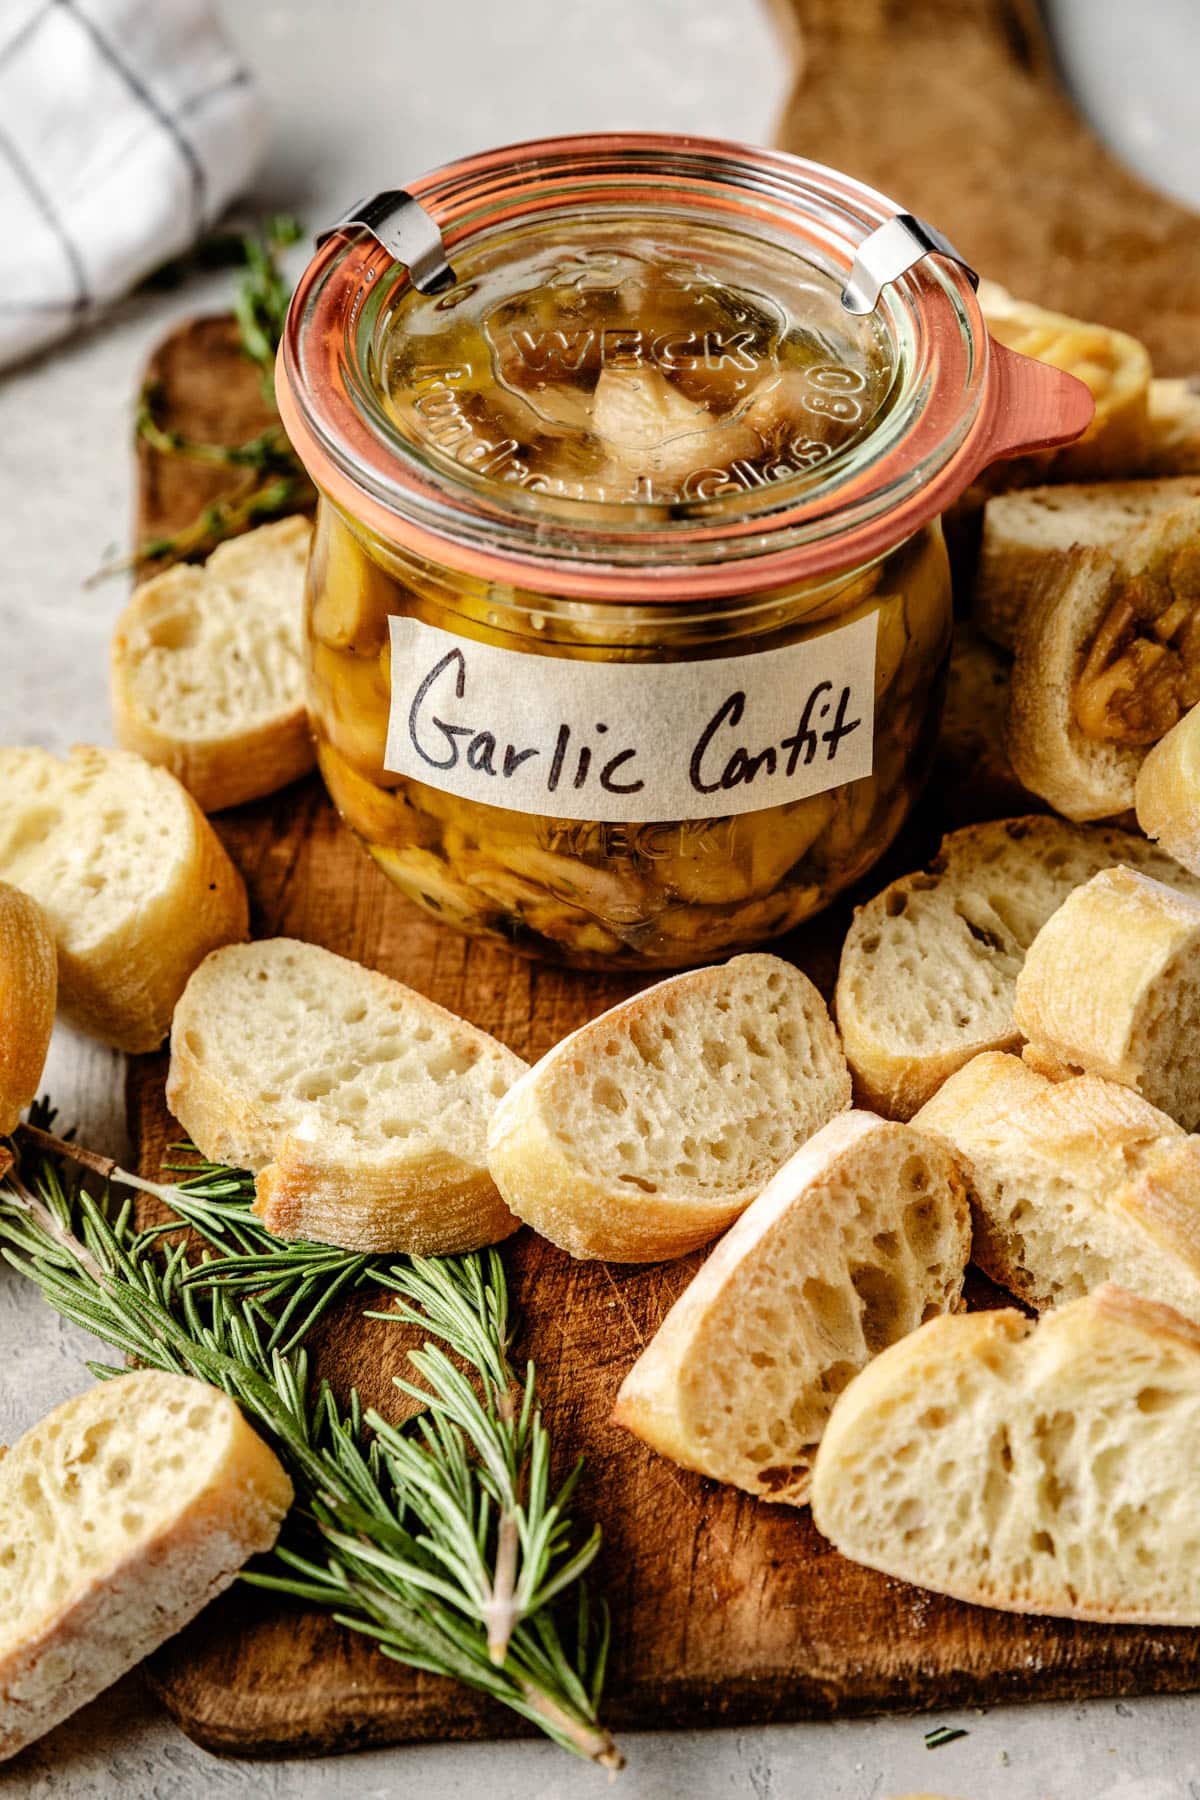 a jar of garlic confit surrounded by slices of bread